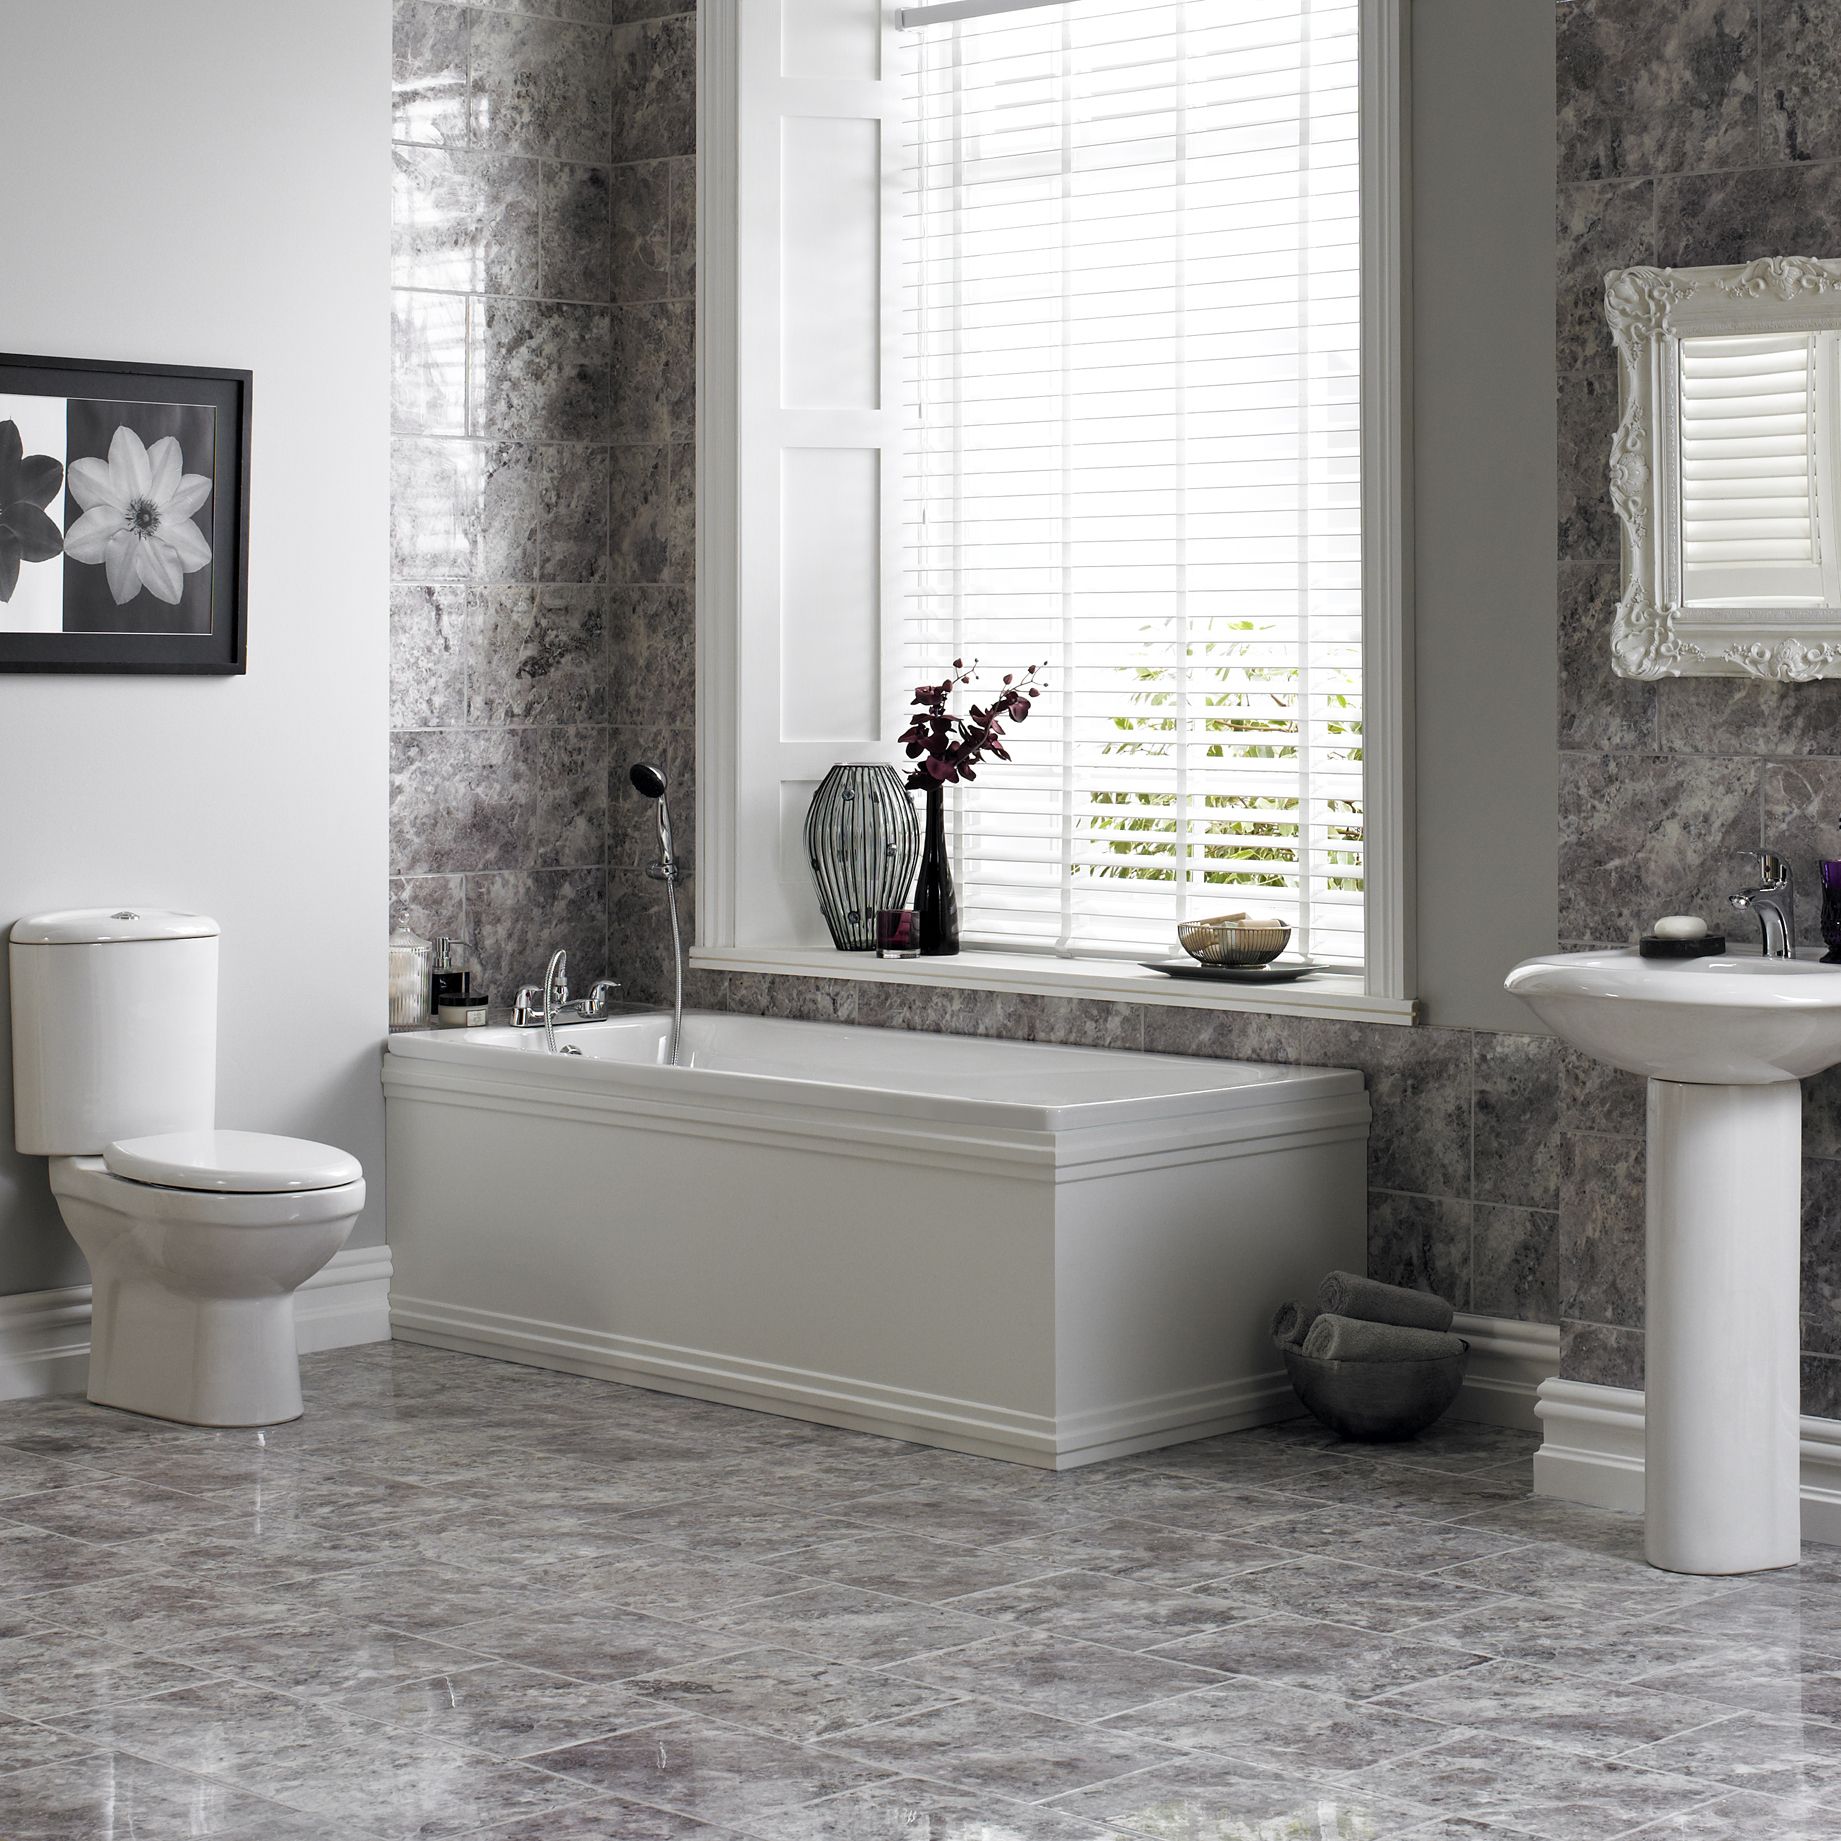 Cooke & Lewis Romeo Modern Close-coupled Toilet with Soft close seat